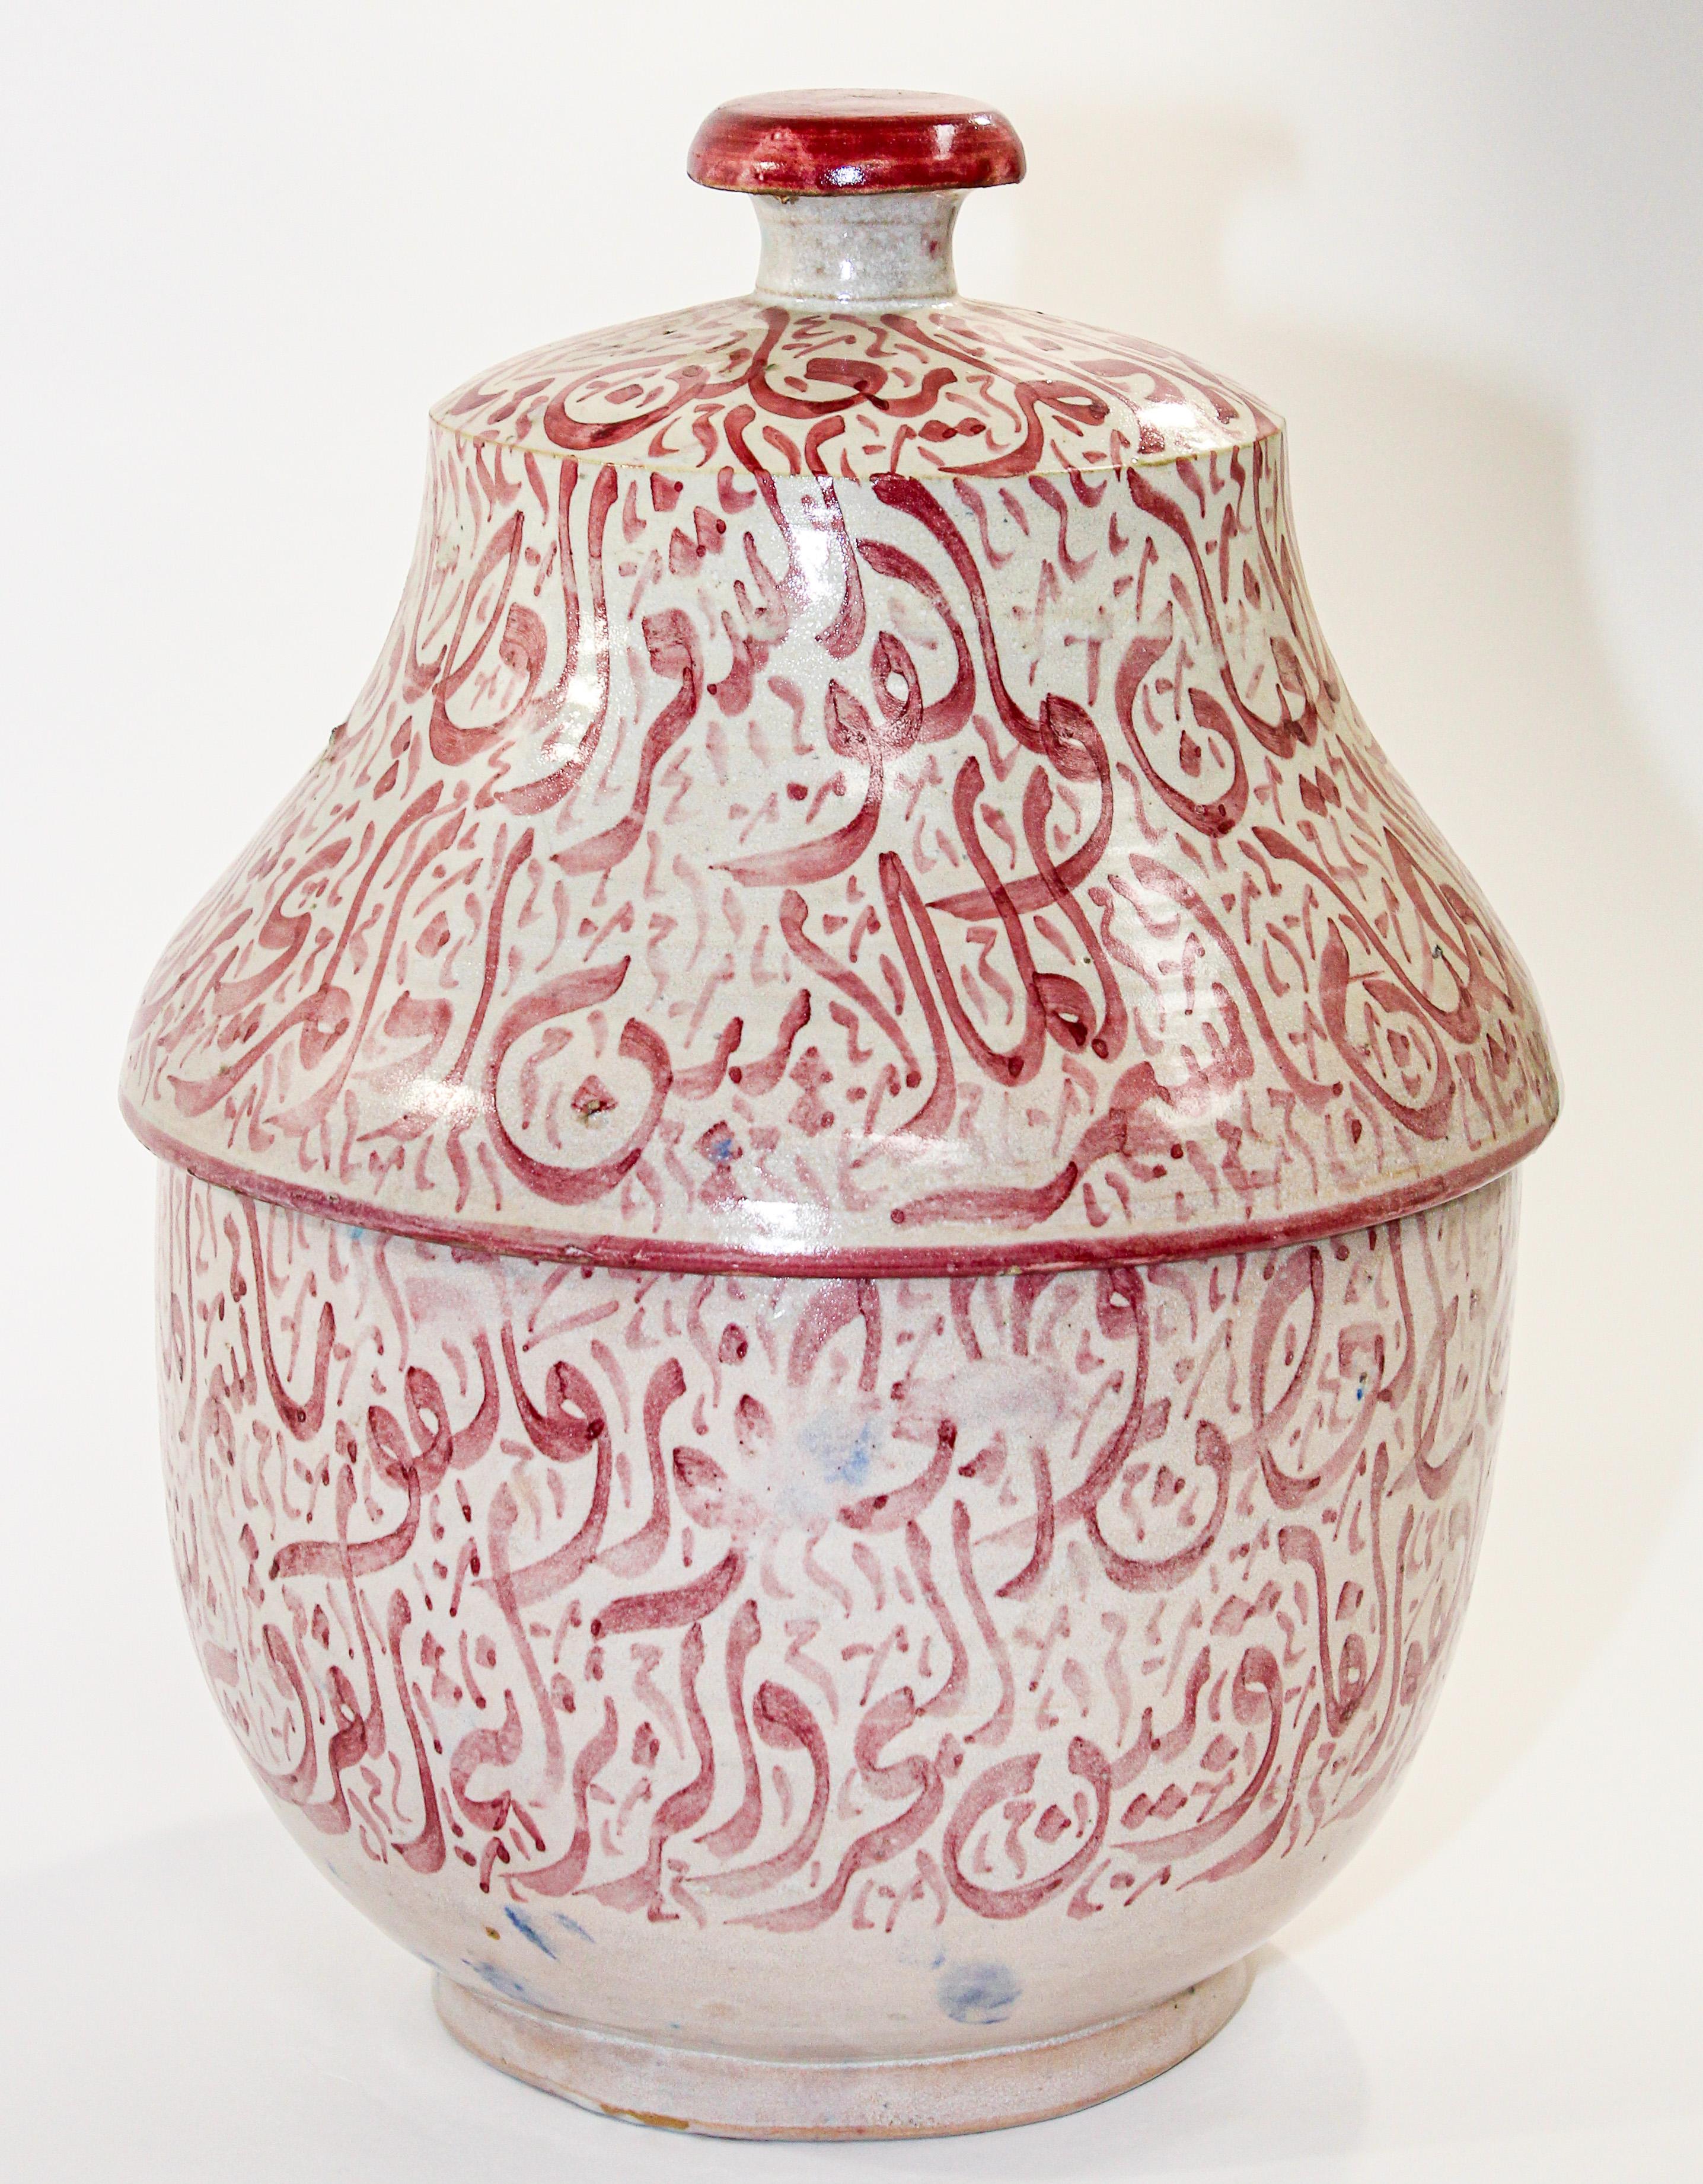 Moroccan Ceramic Lidded Urn from Fez with Arabic Calligraphy Pink Writing For Sale 4